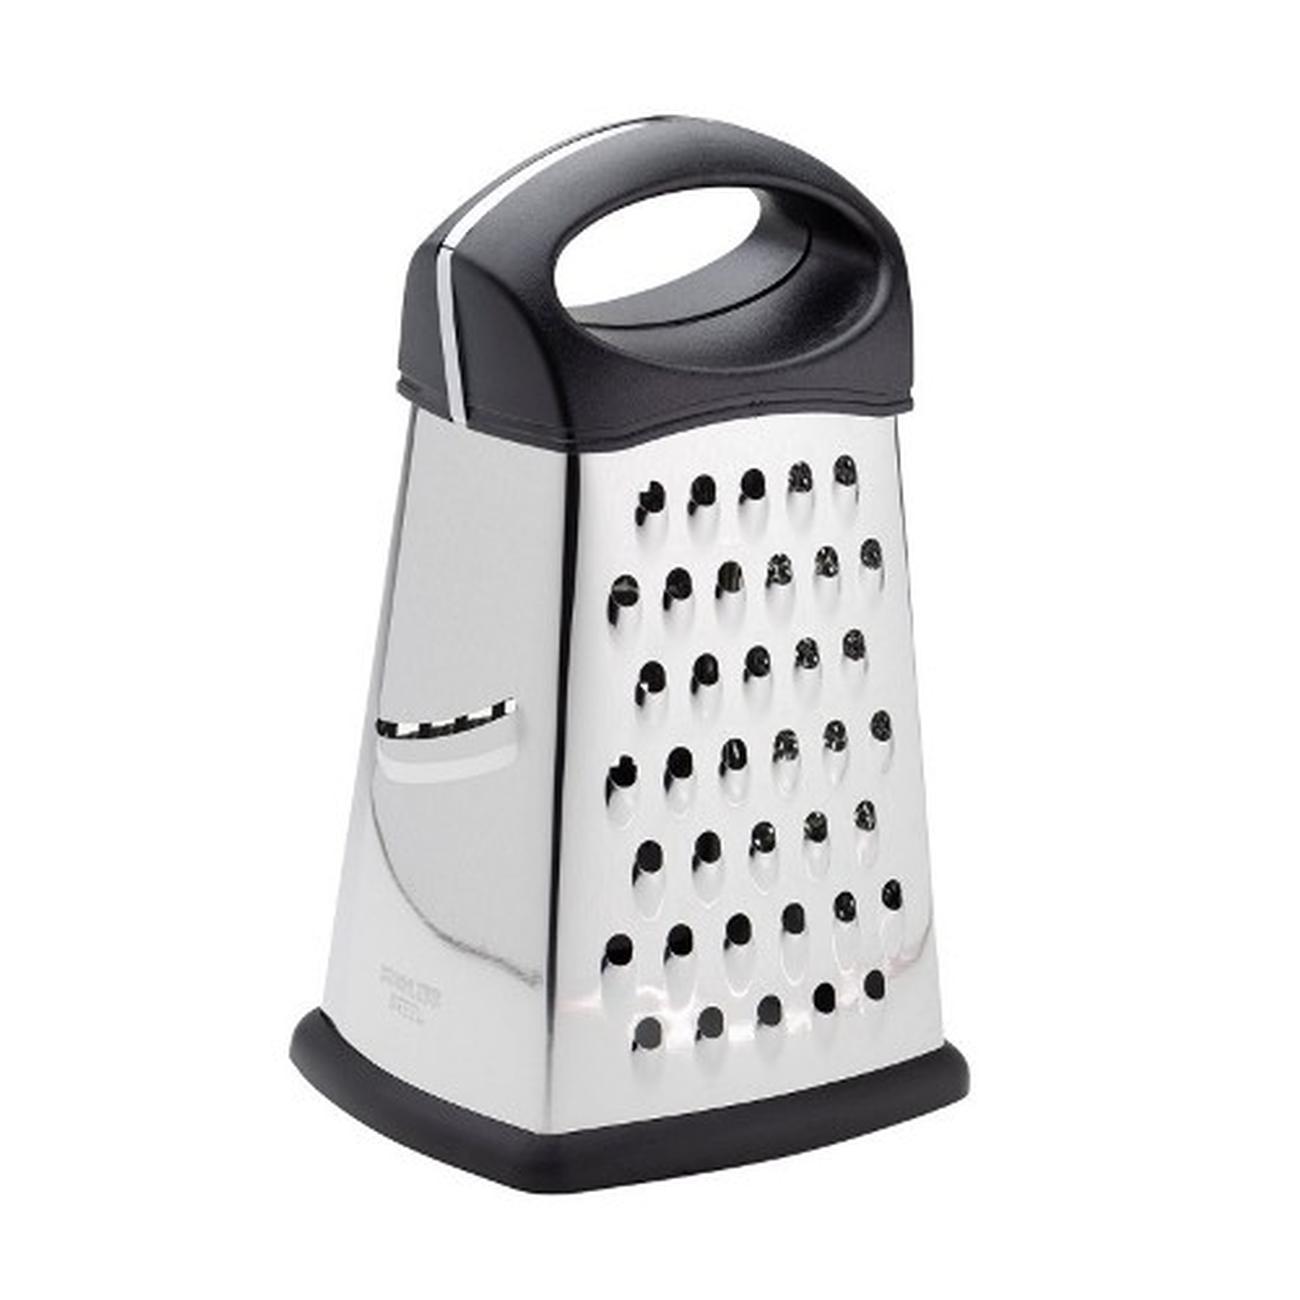 taylors-eye-witness-4-sided-box-grater - Taylor's Eye Witness 4-in-1 Box Grater